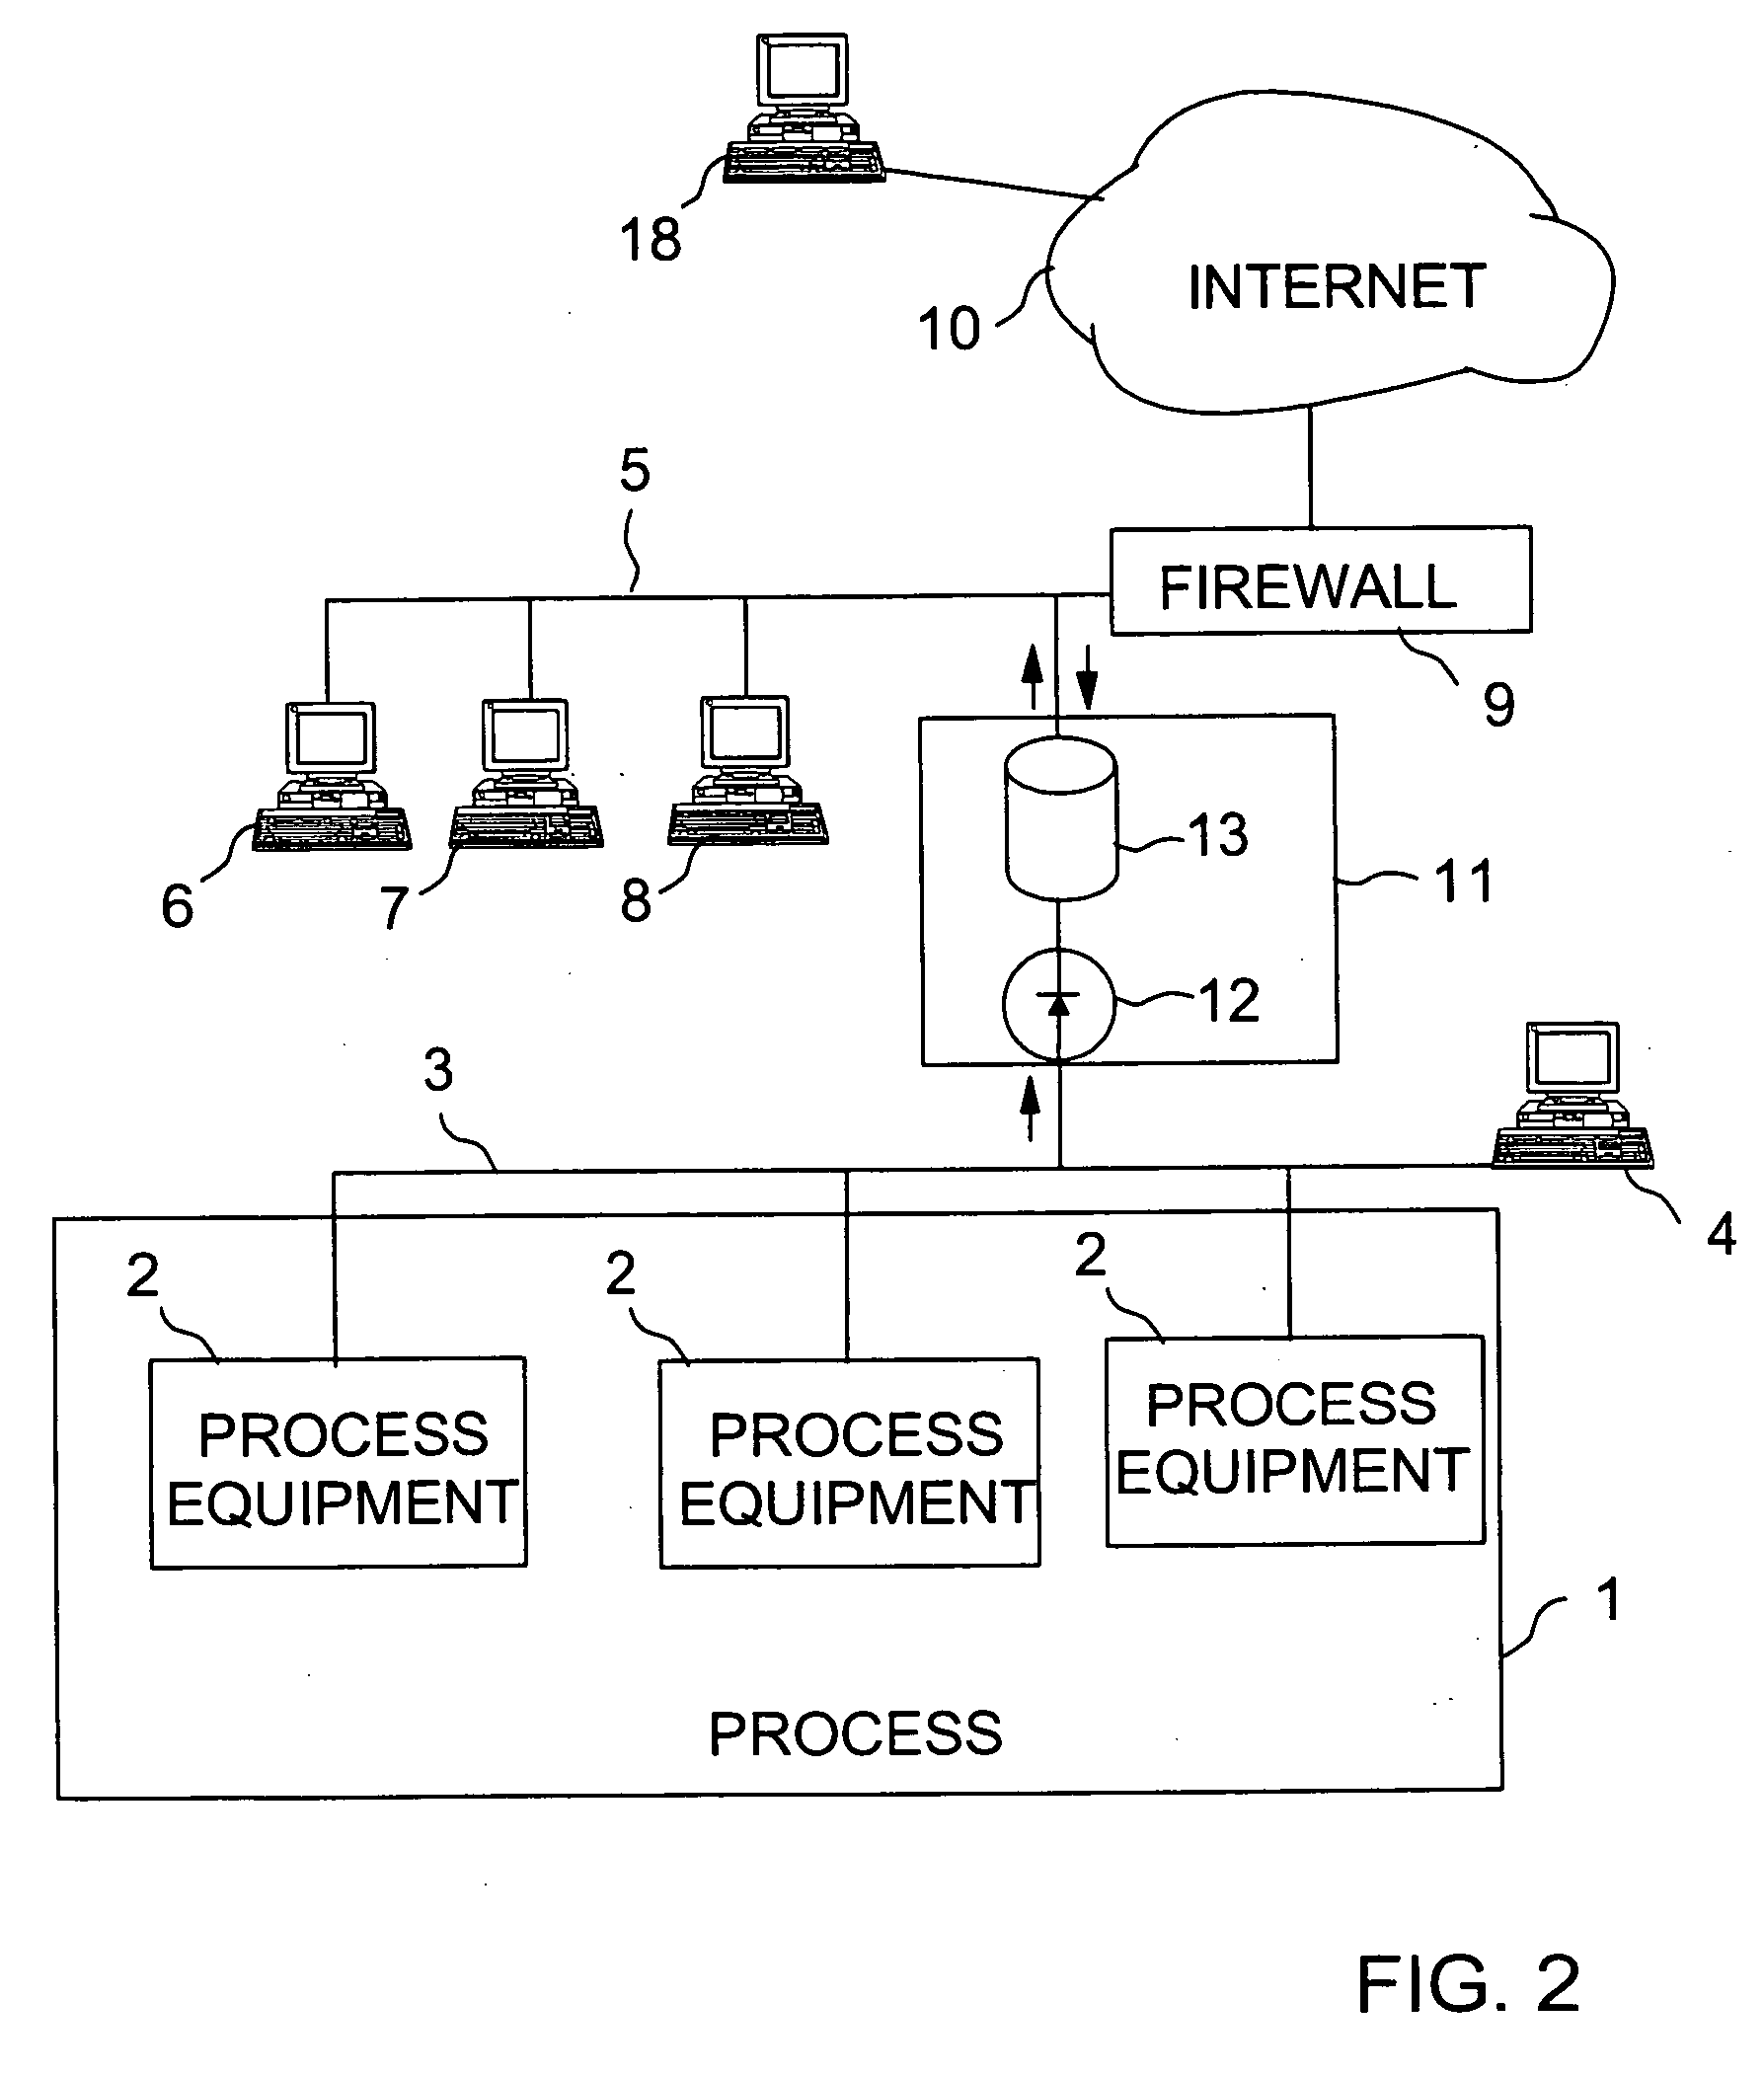 System, communication network and method for transmitting information